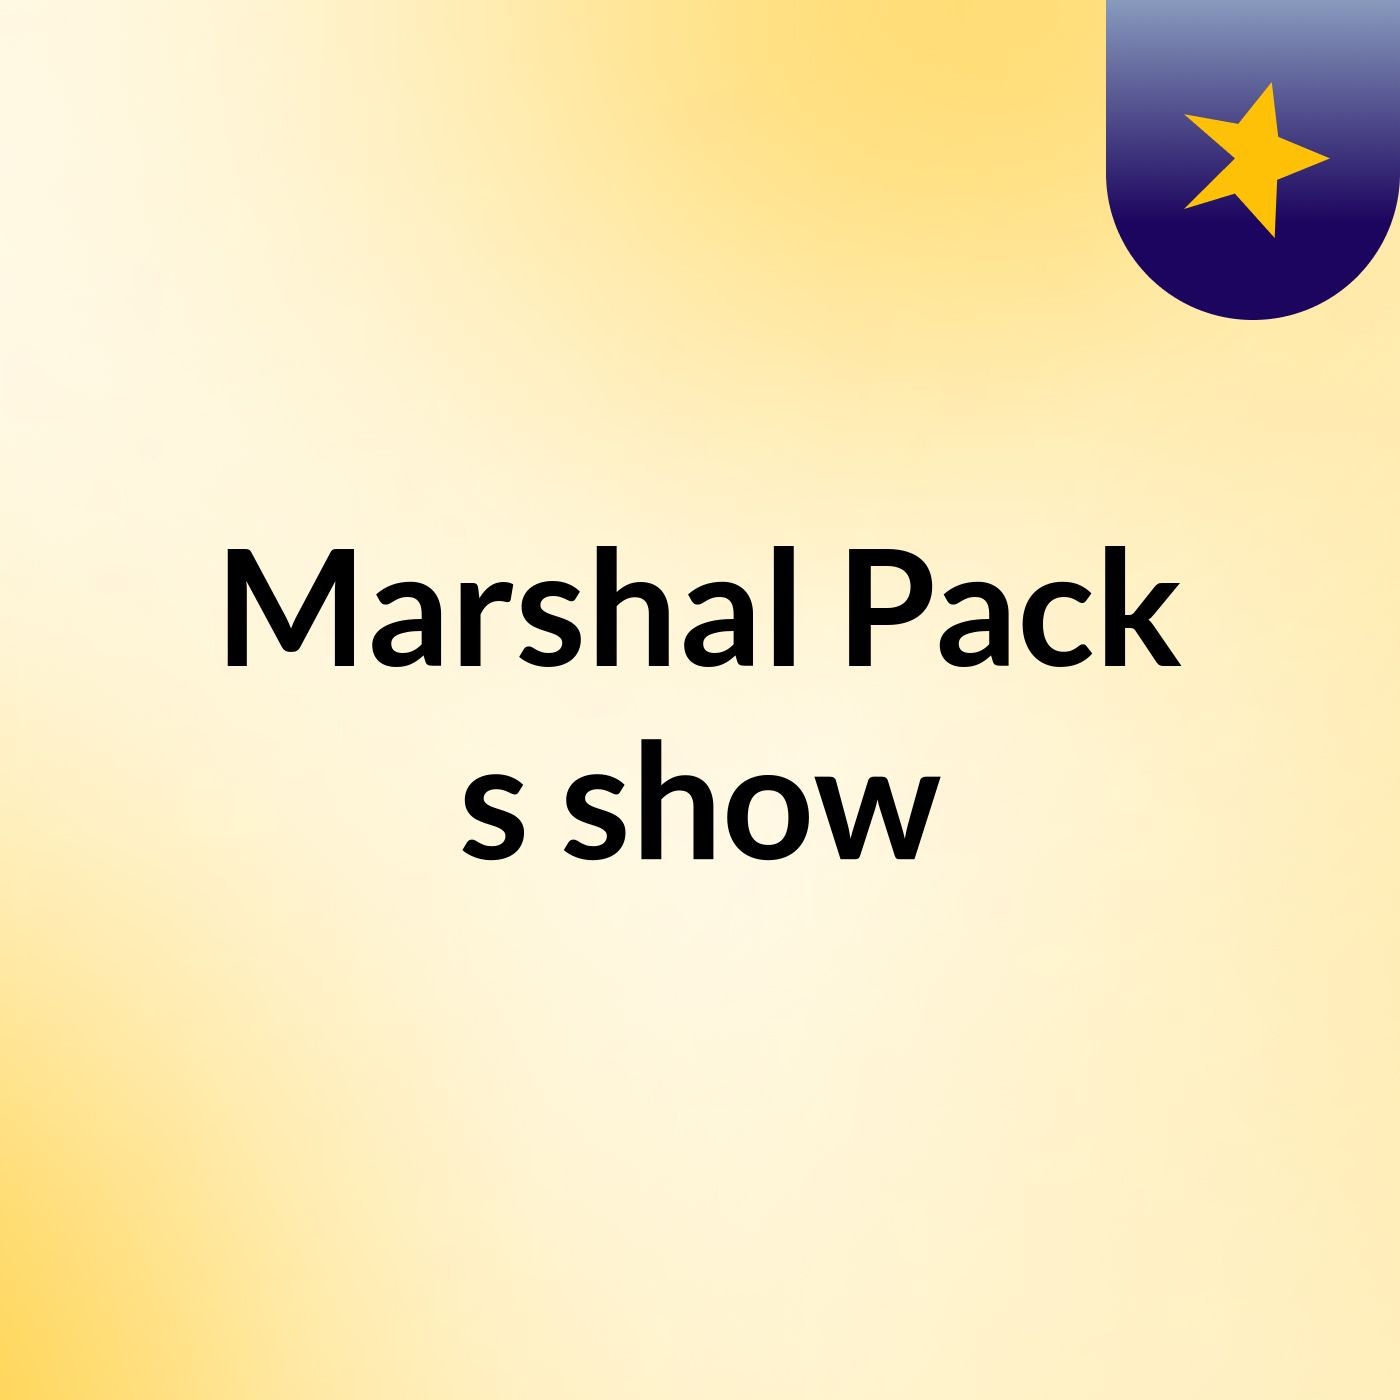 Episode 3 - Marshal Pack's show